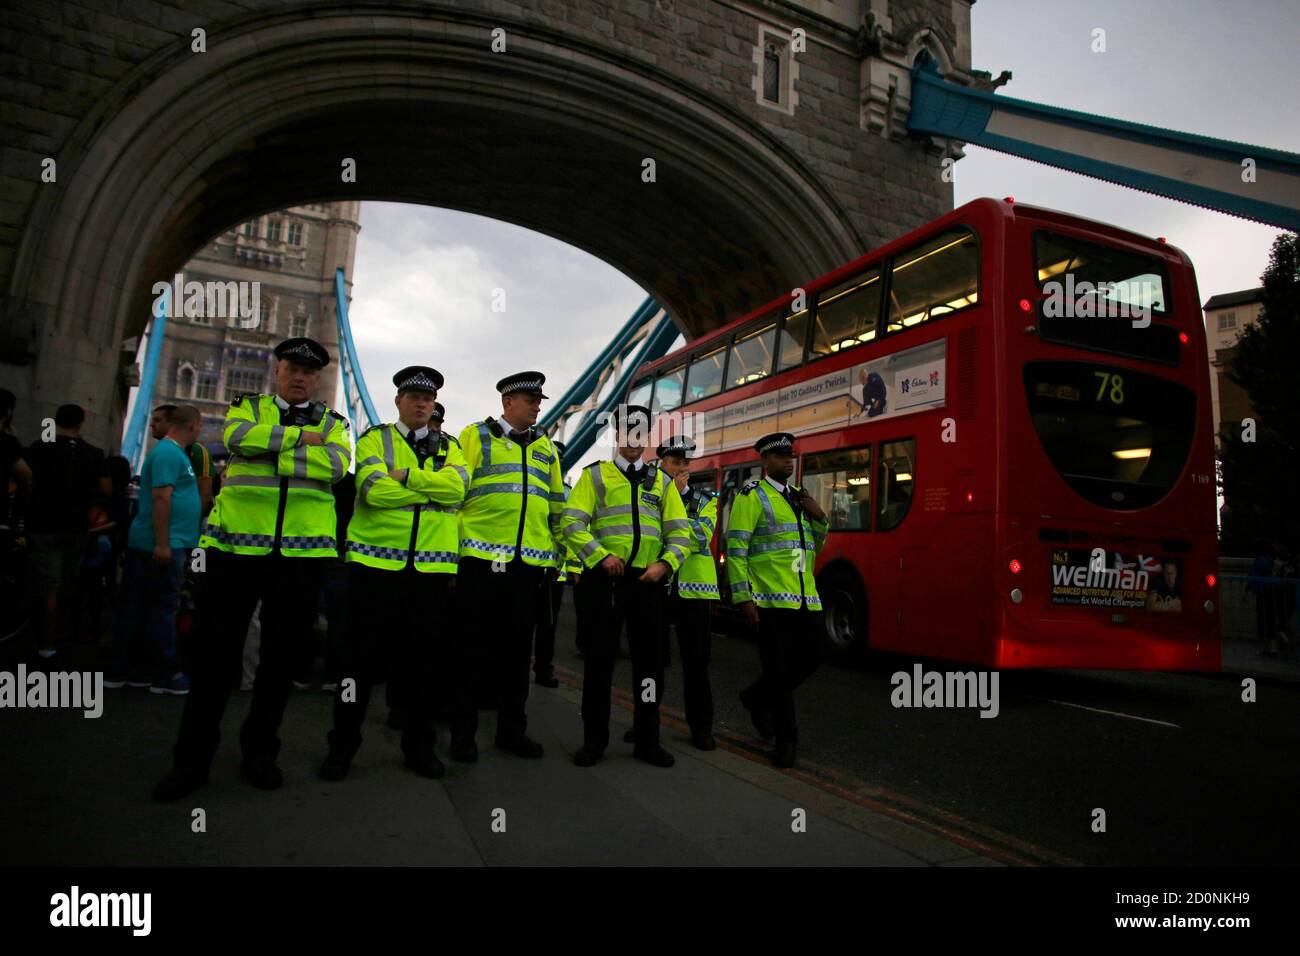 Police stop cars on the Tower Bridge during the night of the opening ceremony of London 2012 Olympic Games in London July 27, 2012. REUTERS/Mark Blinch (BRITAIN - Tags: SPORT OLYMPICS CRIME LAW) Stock Photo